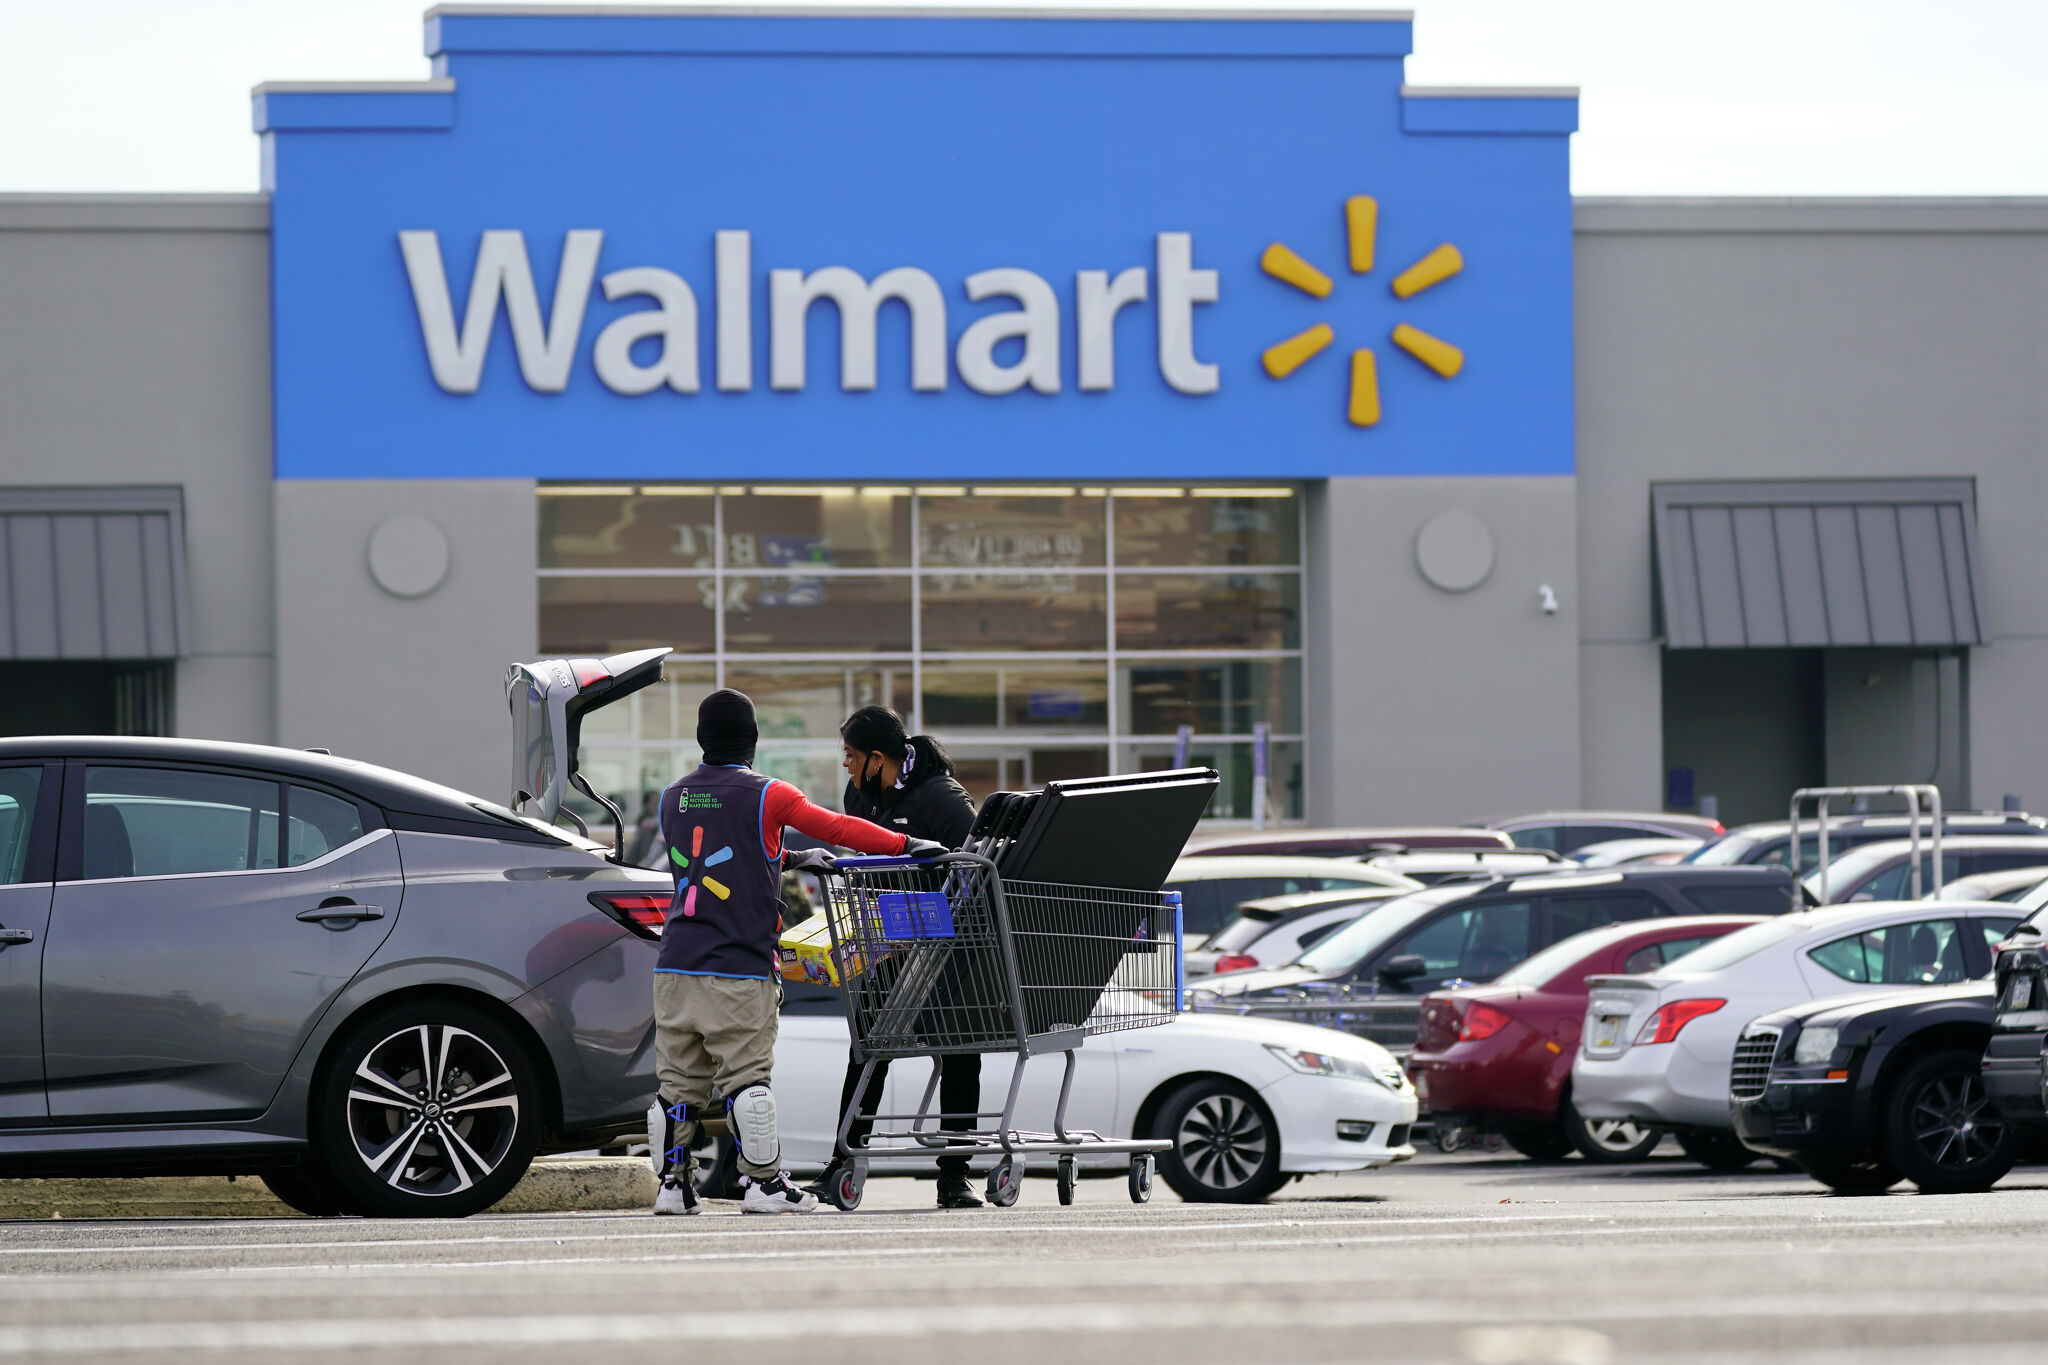 Walmart to install electric vehicle charging stations at US stores